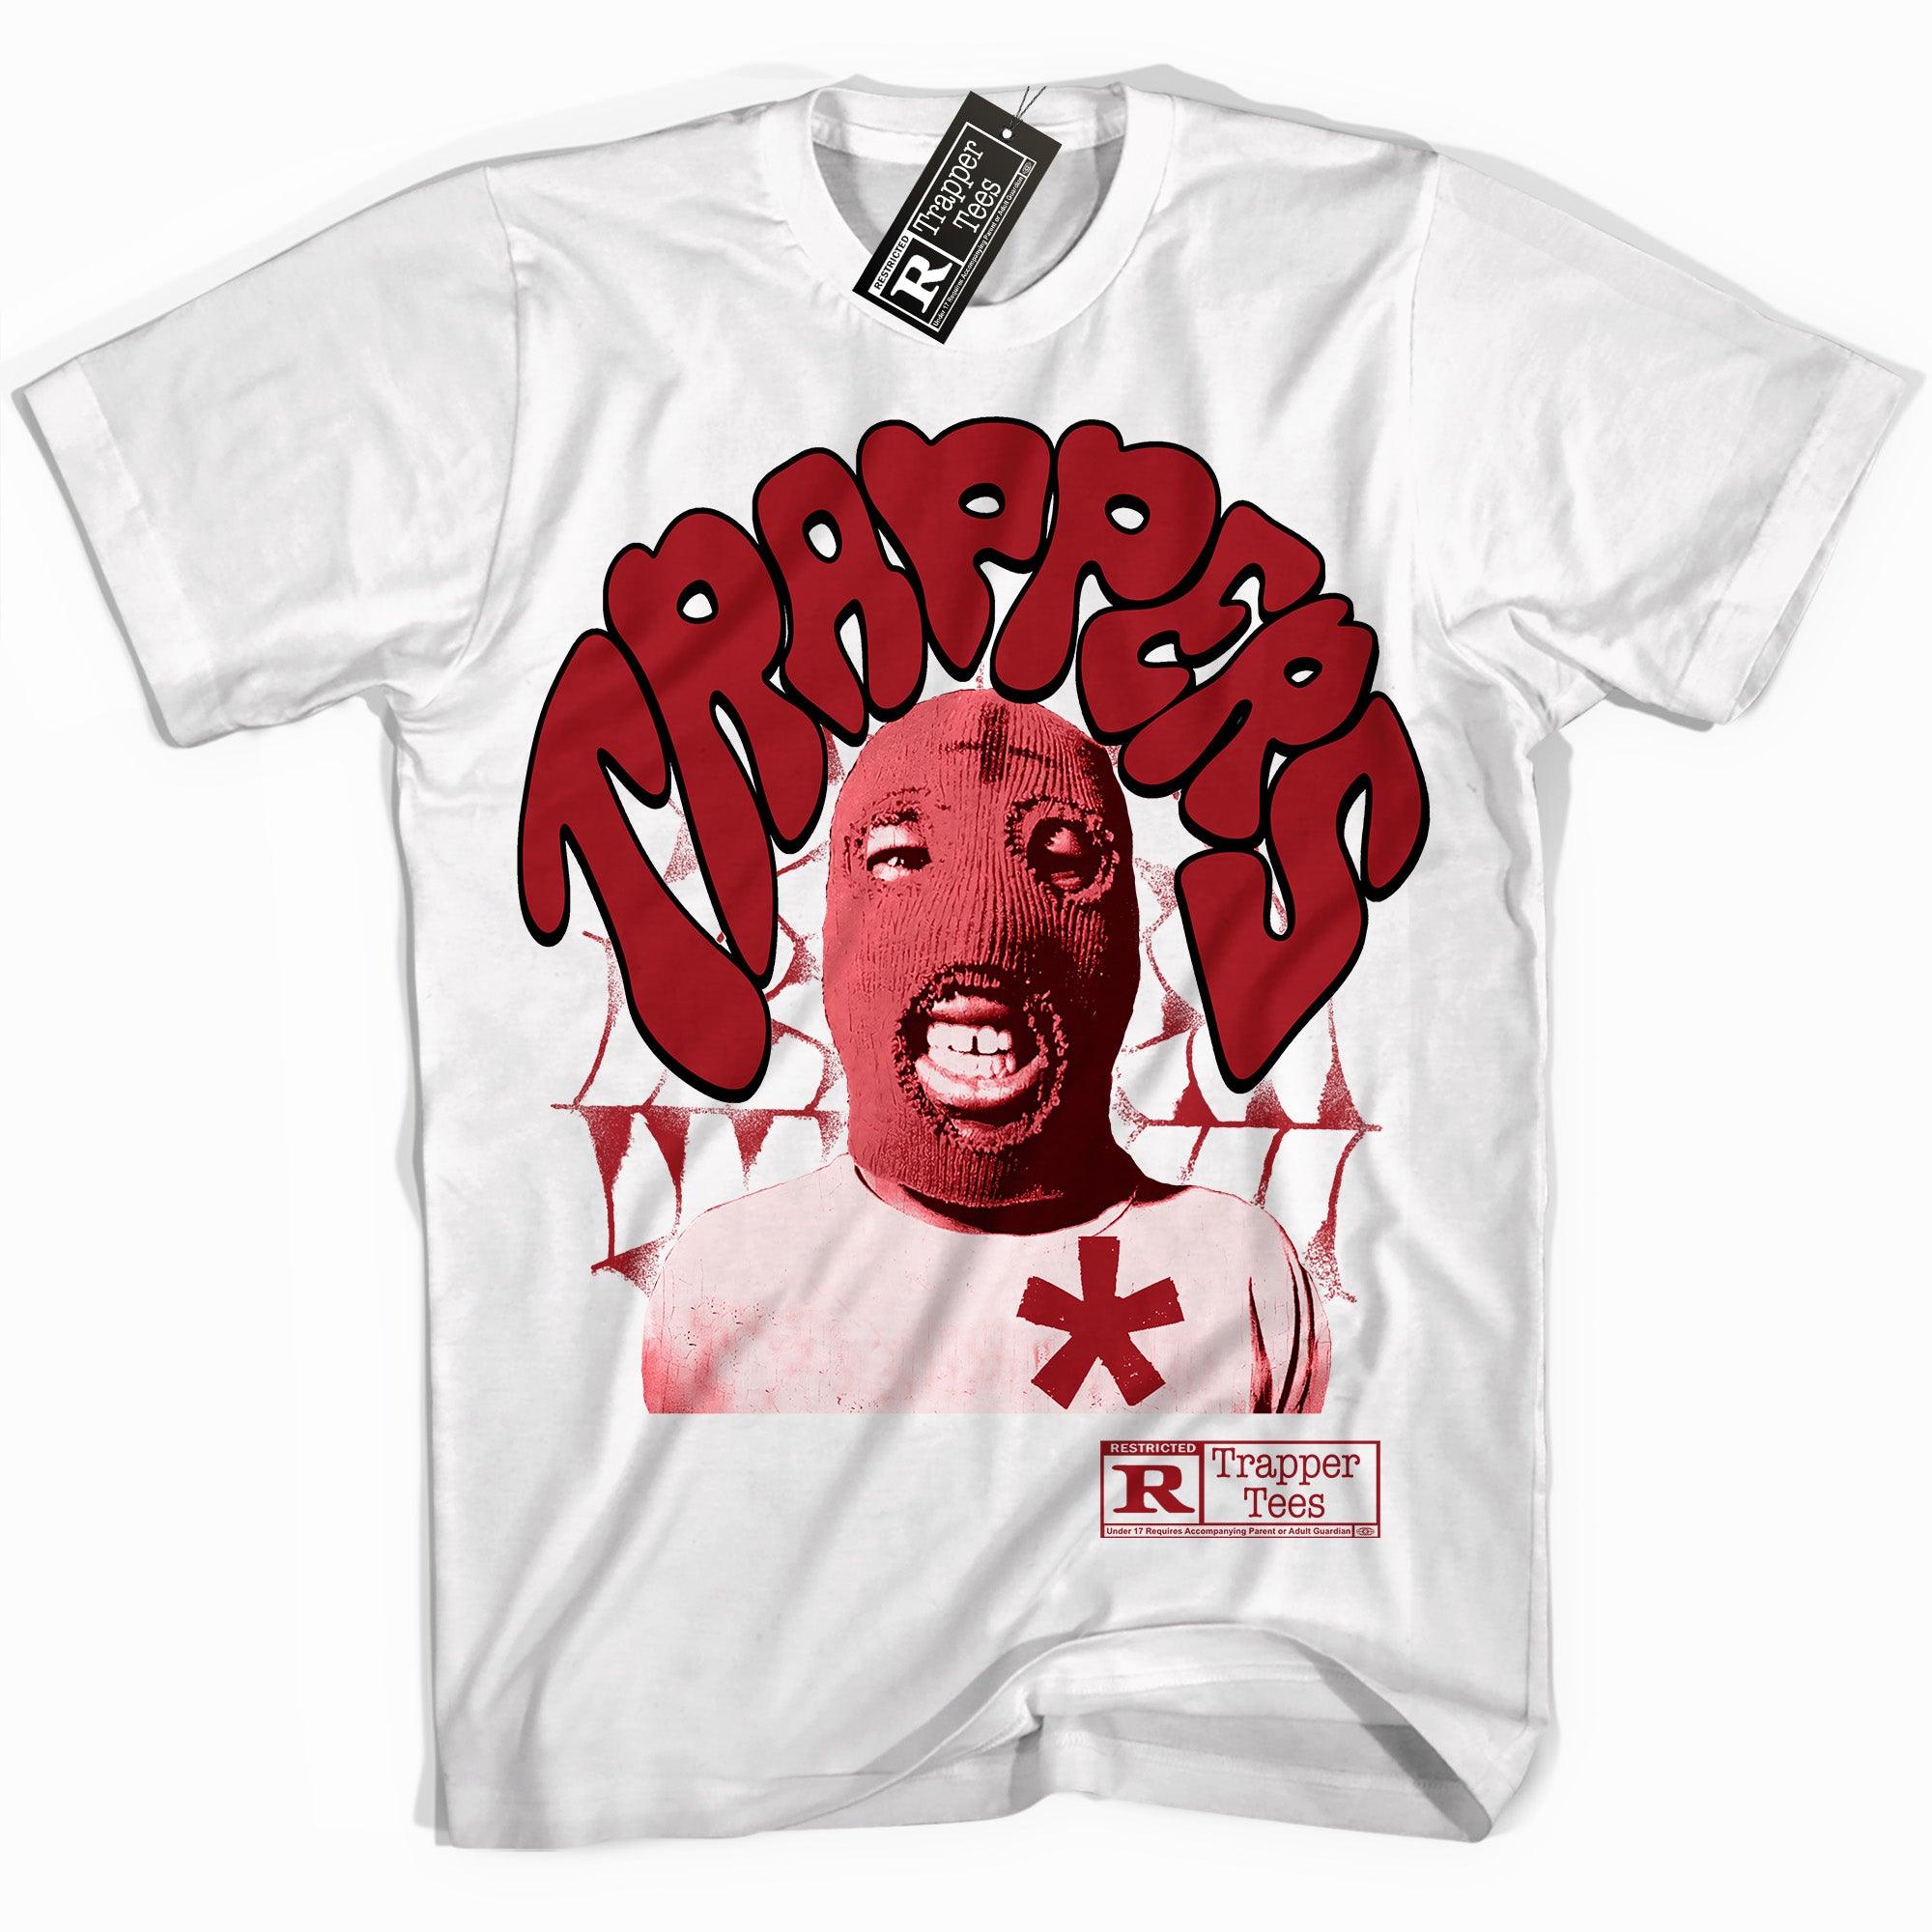 Cool White graphic tee with “ Trapper Ski Mask ” print, that perfectly matches Air Jordan 12 Cherry sneakers